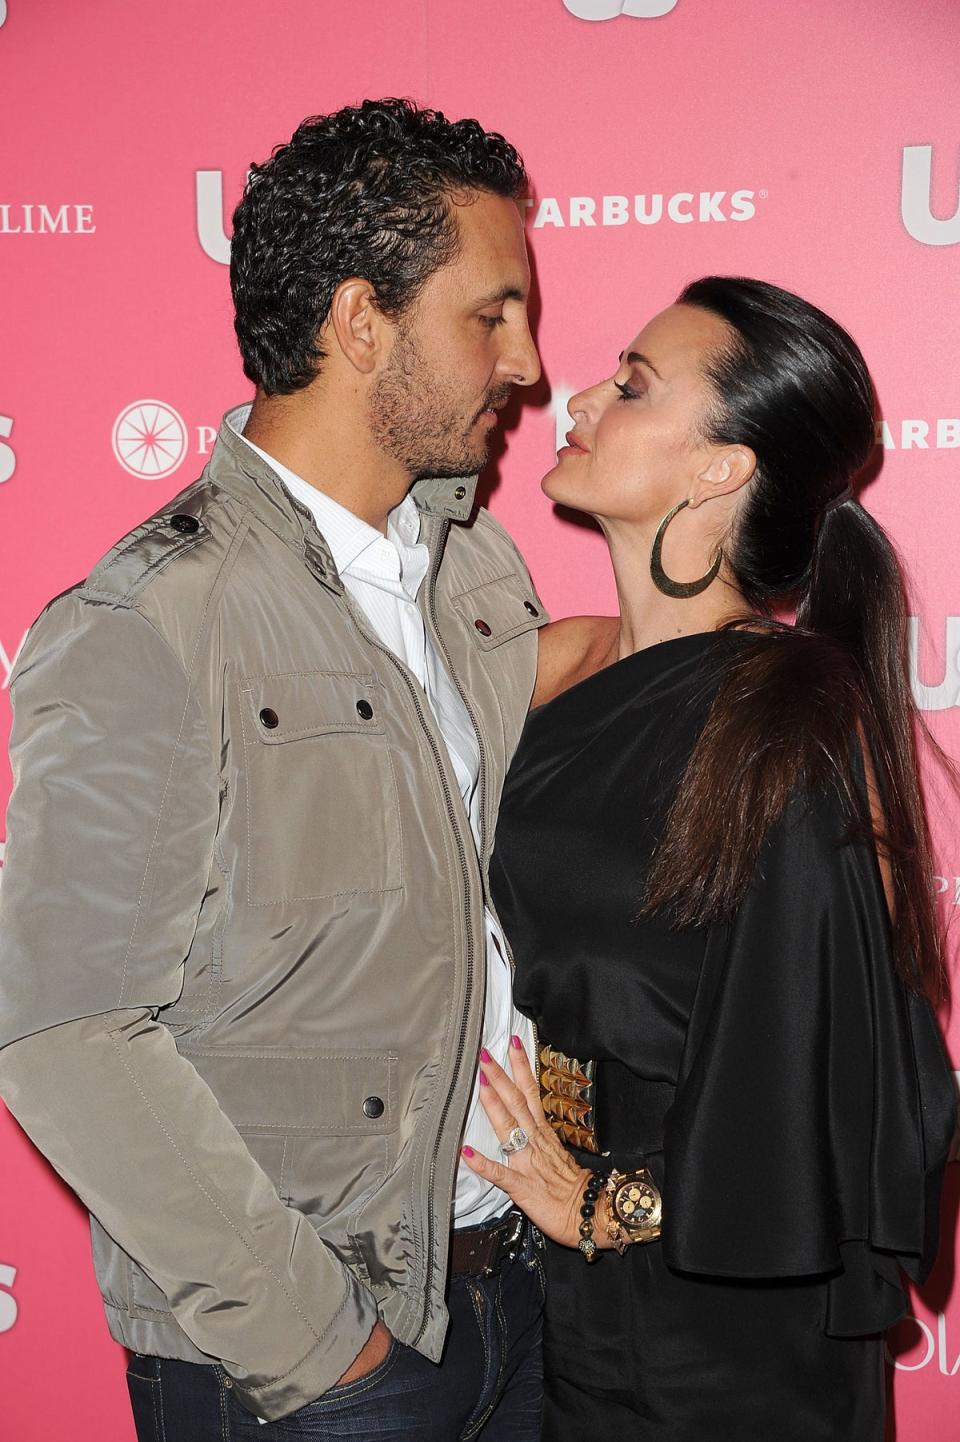 Kyle Richards and Mauricio Umansky  arrive at the Us Weekly Hot Hollywood party held at Eden on April 26, 2011 (Getty Images)